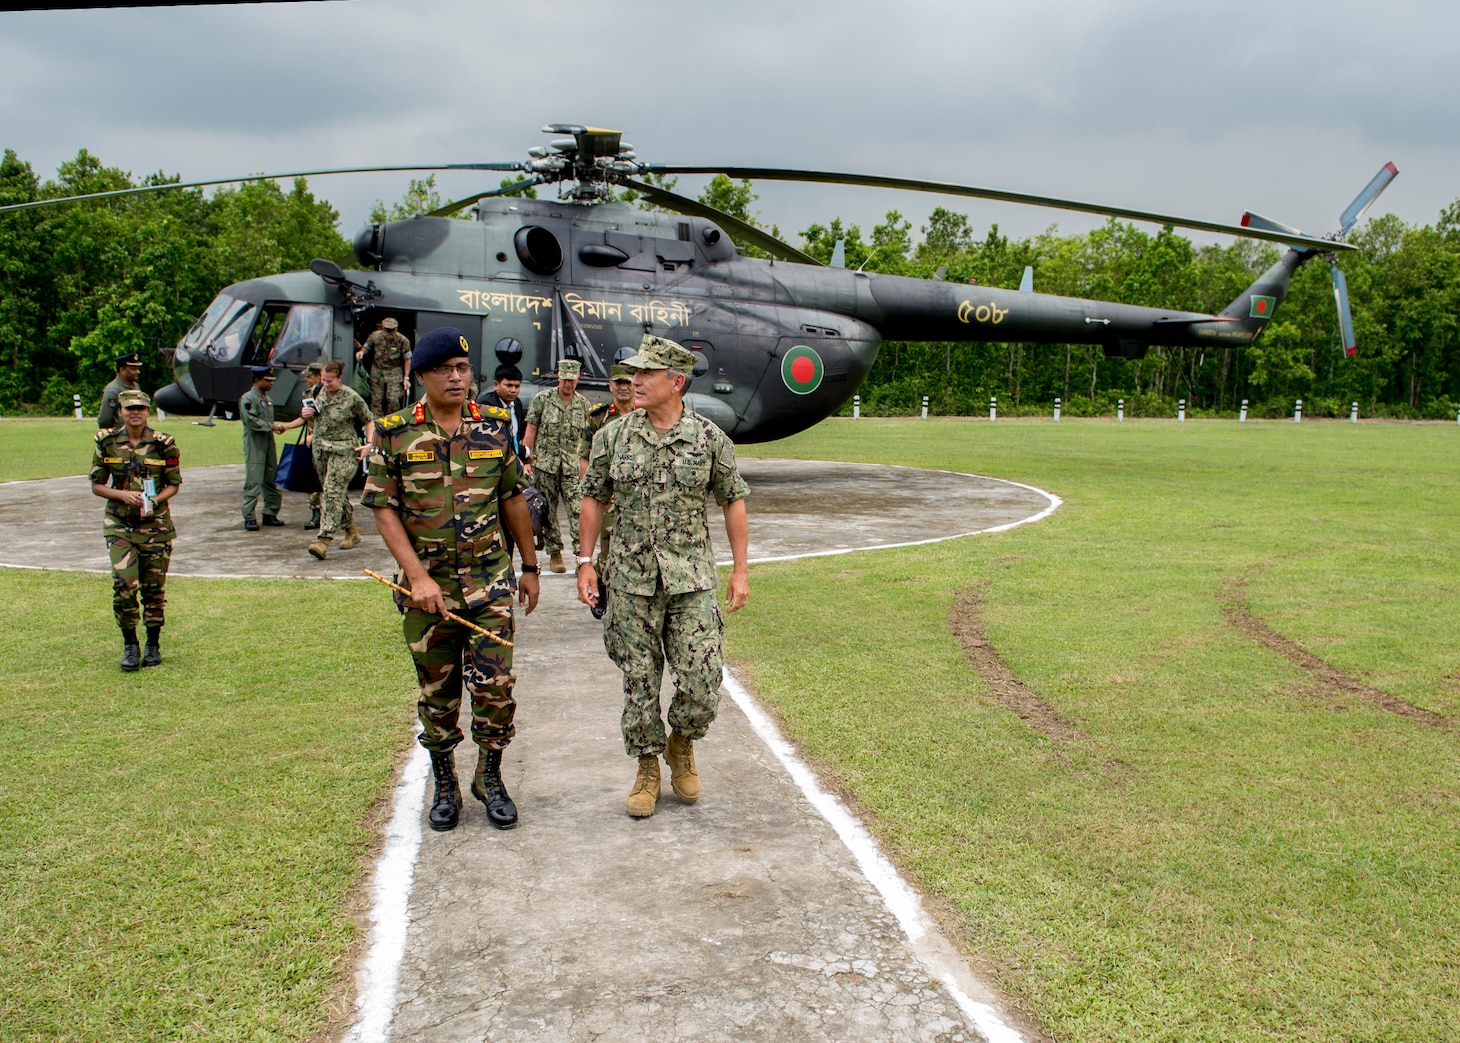 170708-N-WY954-210GAZIPUR, BANGLADESH (July 8, 2017) – Adm. Harry Harris, Commander U.S. Pacific Command (PACOM), is greeted by Commandant of the Bangladesh Institute of Peace Support Operations Training (BIPSOT), Maj. Gen. Enayet Ullah, after arriving by helicopter. This is Harris’ first visit to Bangladesh as PACOM commander. During the visit he met with counterparts and government officials for discussions on military cooperation and regional security initiatives in the Indo-Asia Pacific. (U.S. Navy photo by Mass Communications Specialist 2nd Class Robin W. Peak/ Released)